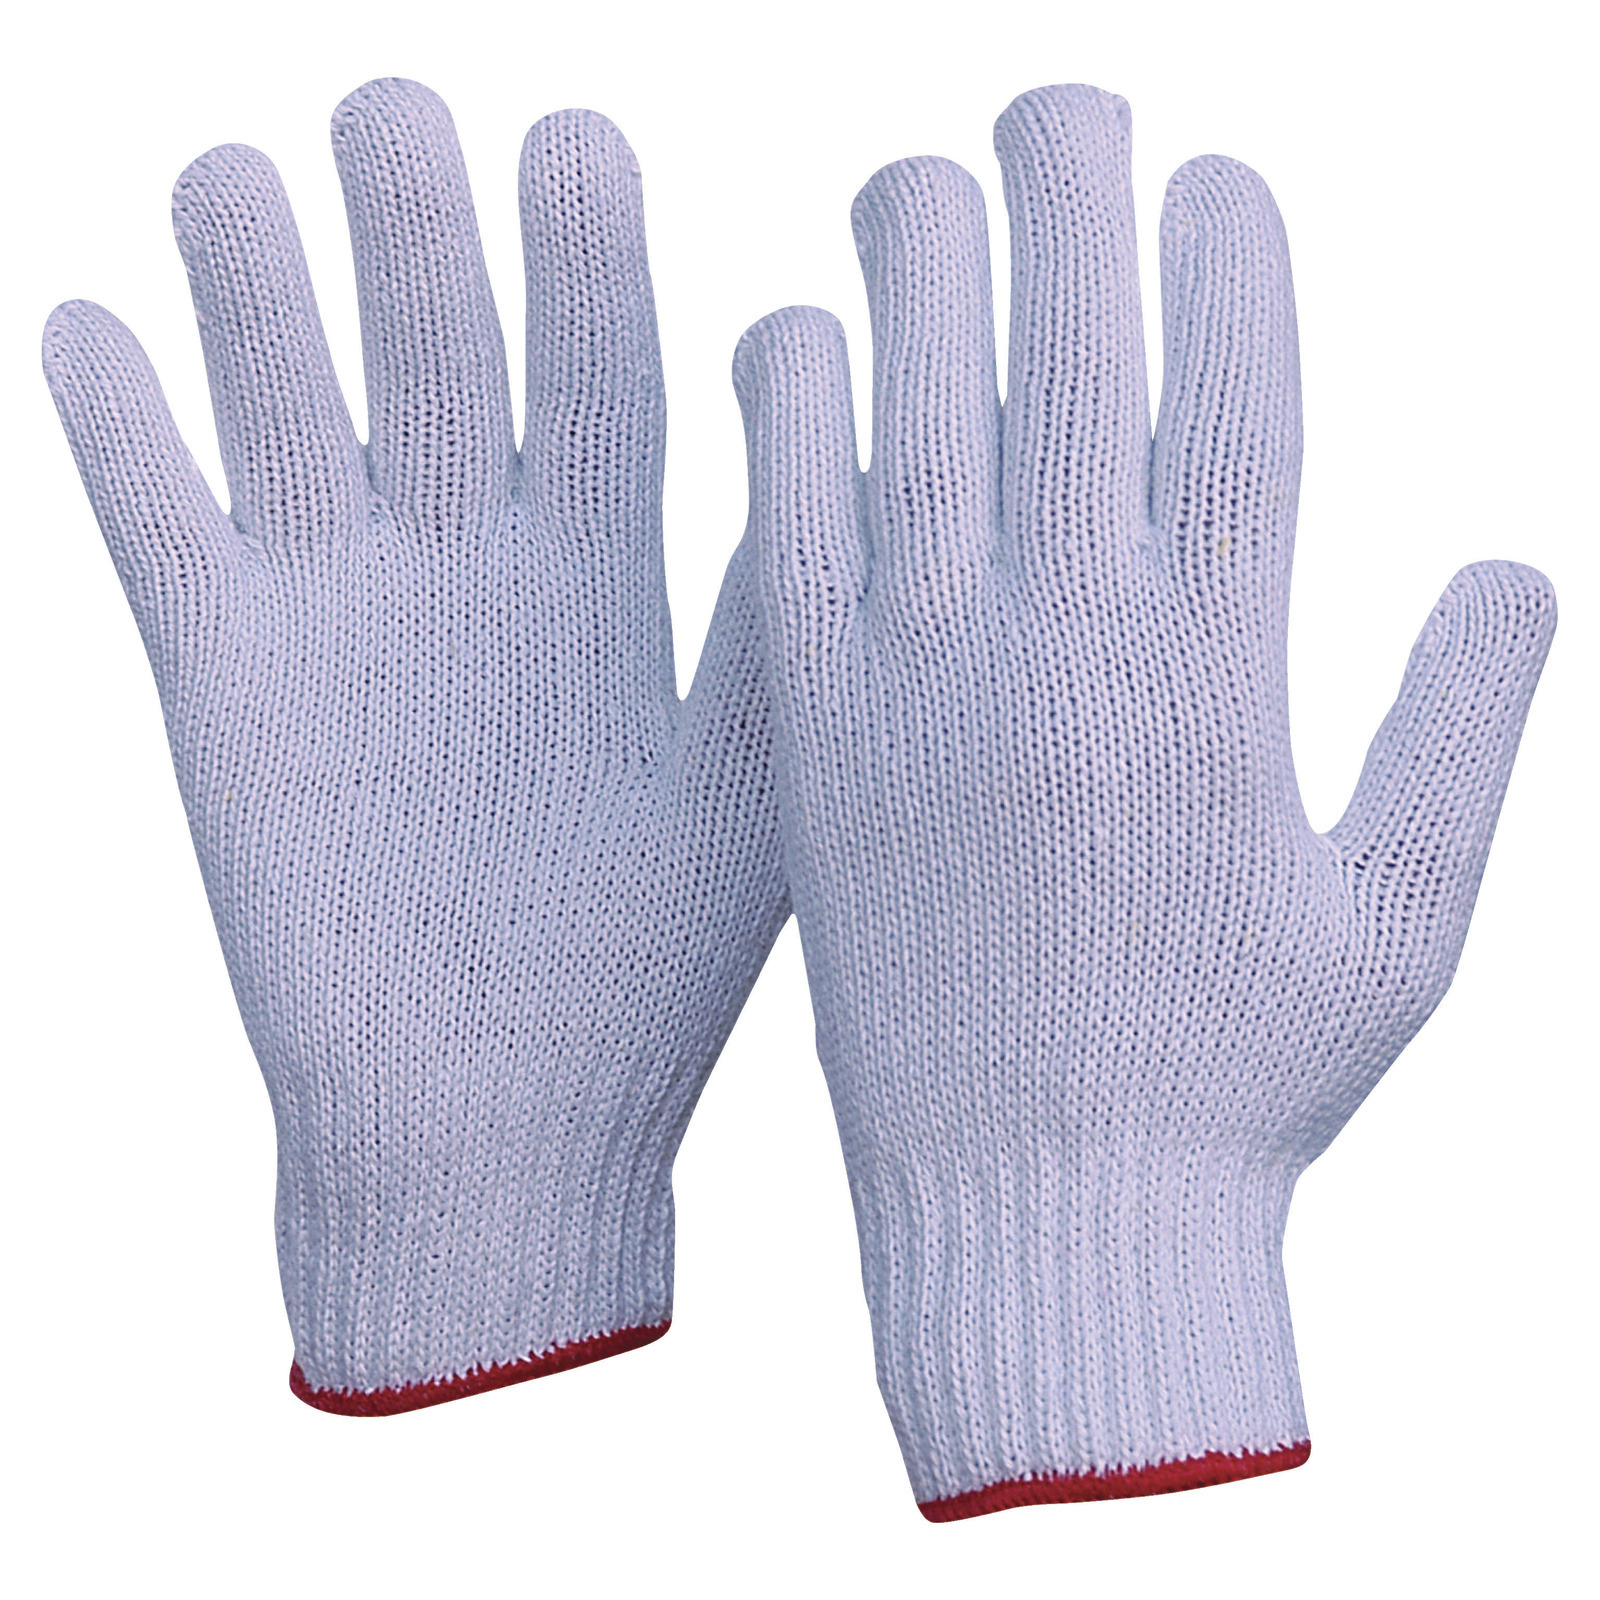 Polycotton Glove - Large (12 pairs/pack)